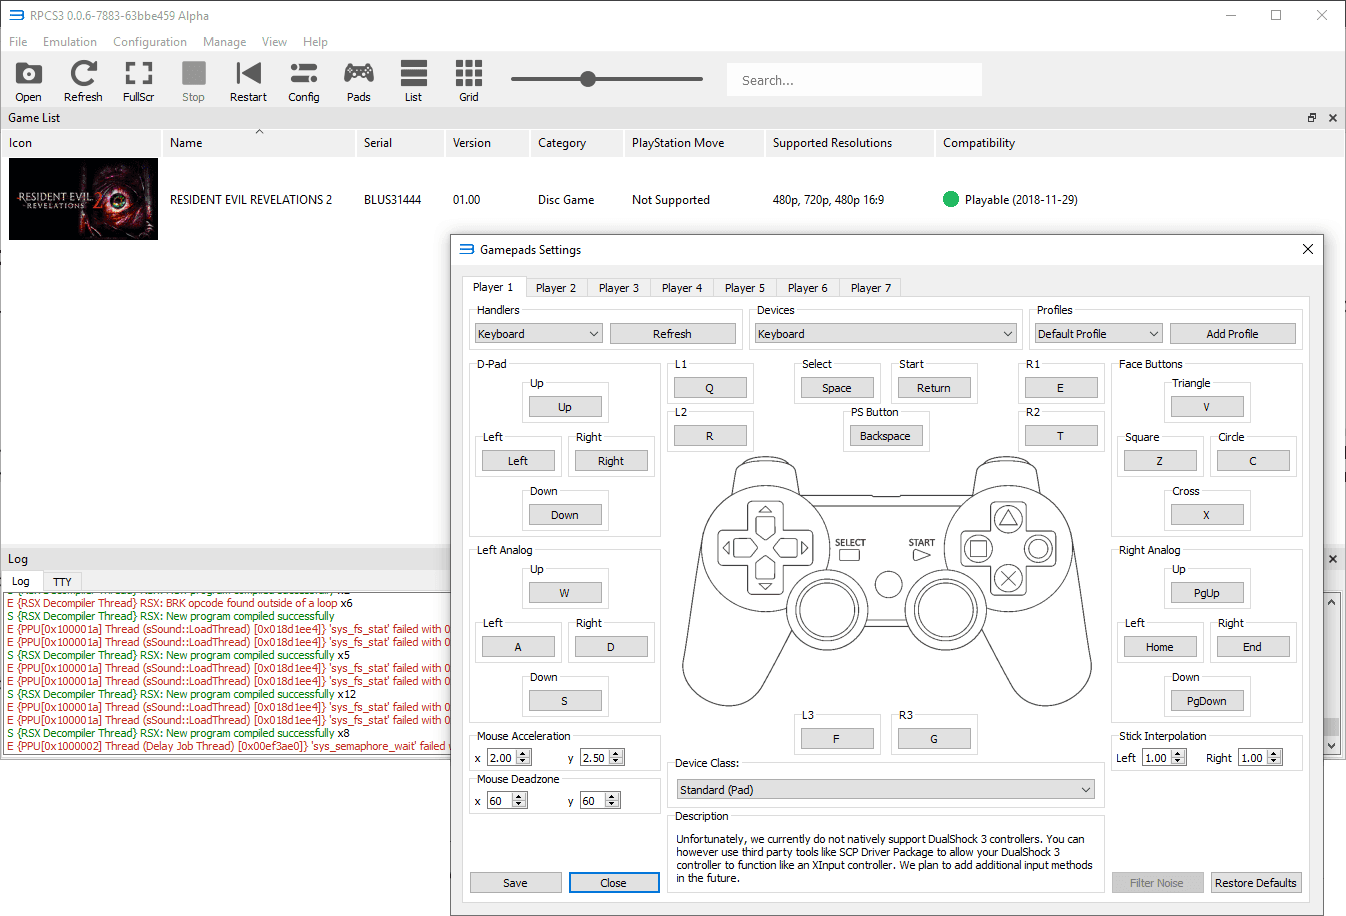 Ps3 Emulator. Ps3 Xbox 360 Controller package. Rpcs3 эмулятор. Эмулятор ps3 русификатор.